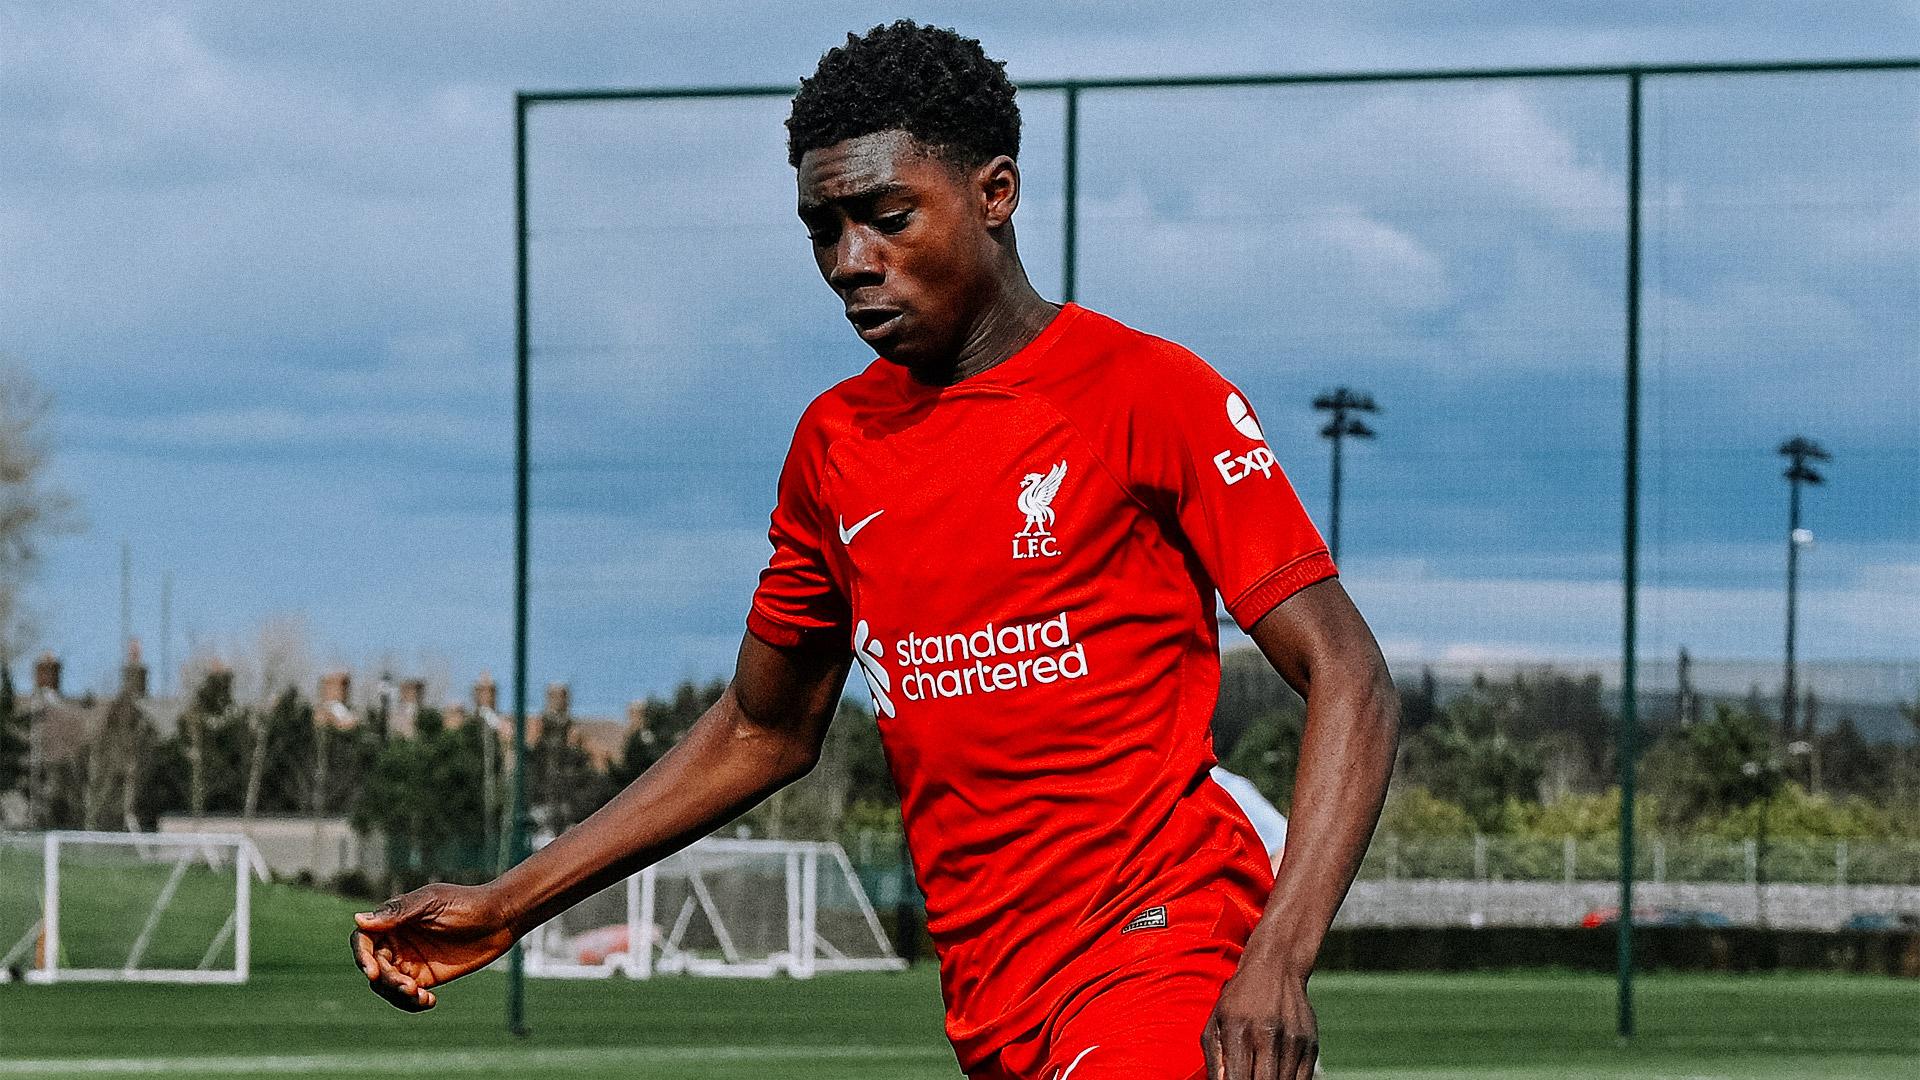 Elijah Gift of Liverpool could move to Athletic Bilbao this summer.